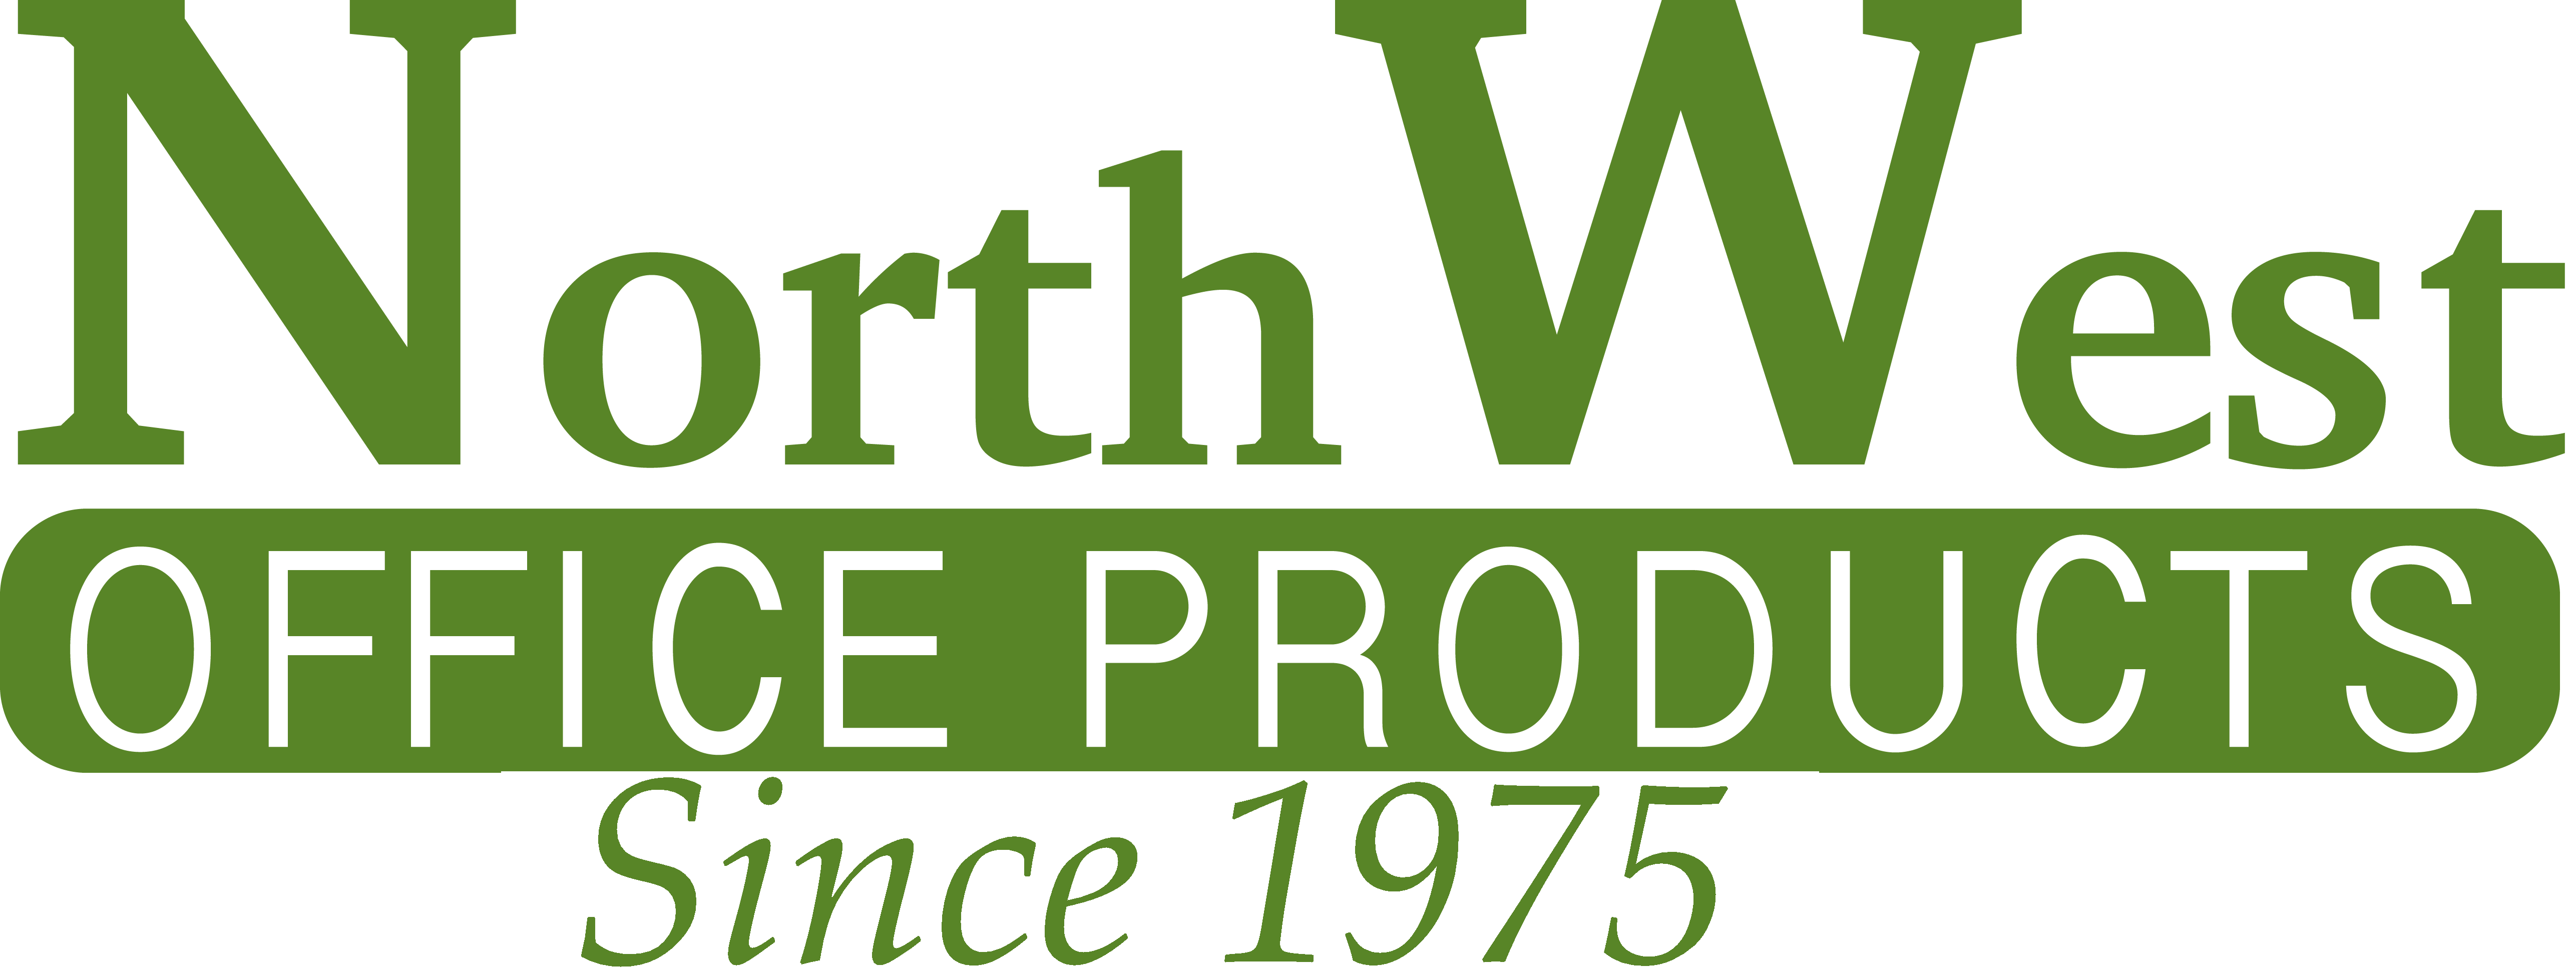 NorthWest Office Products